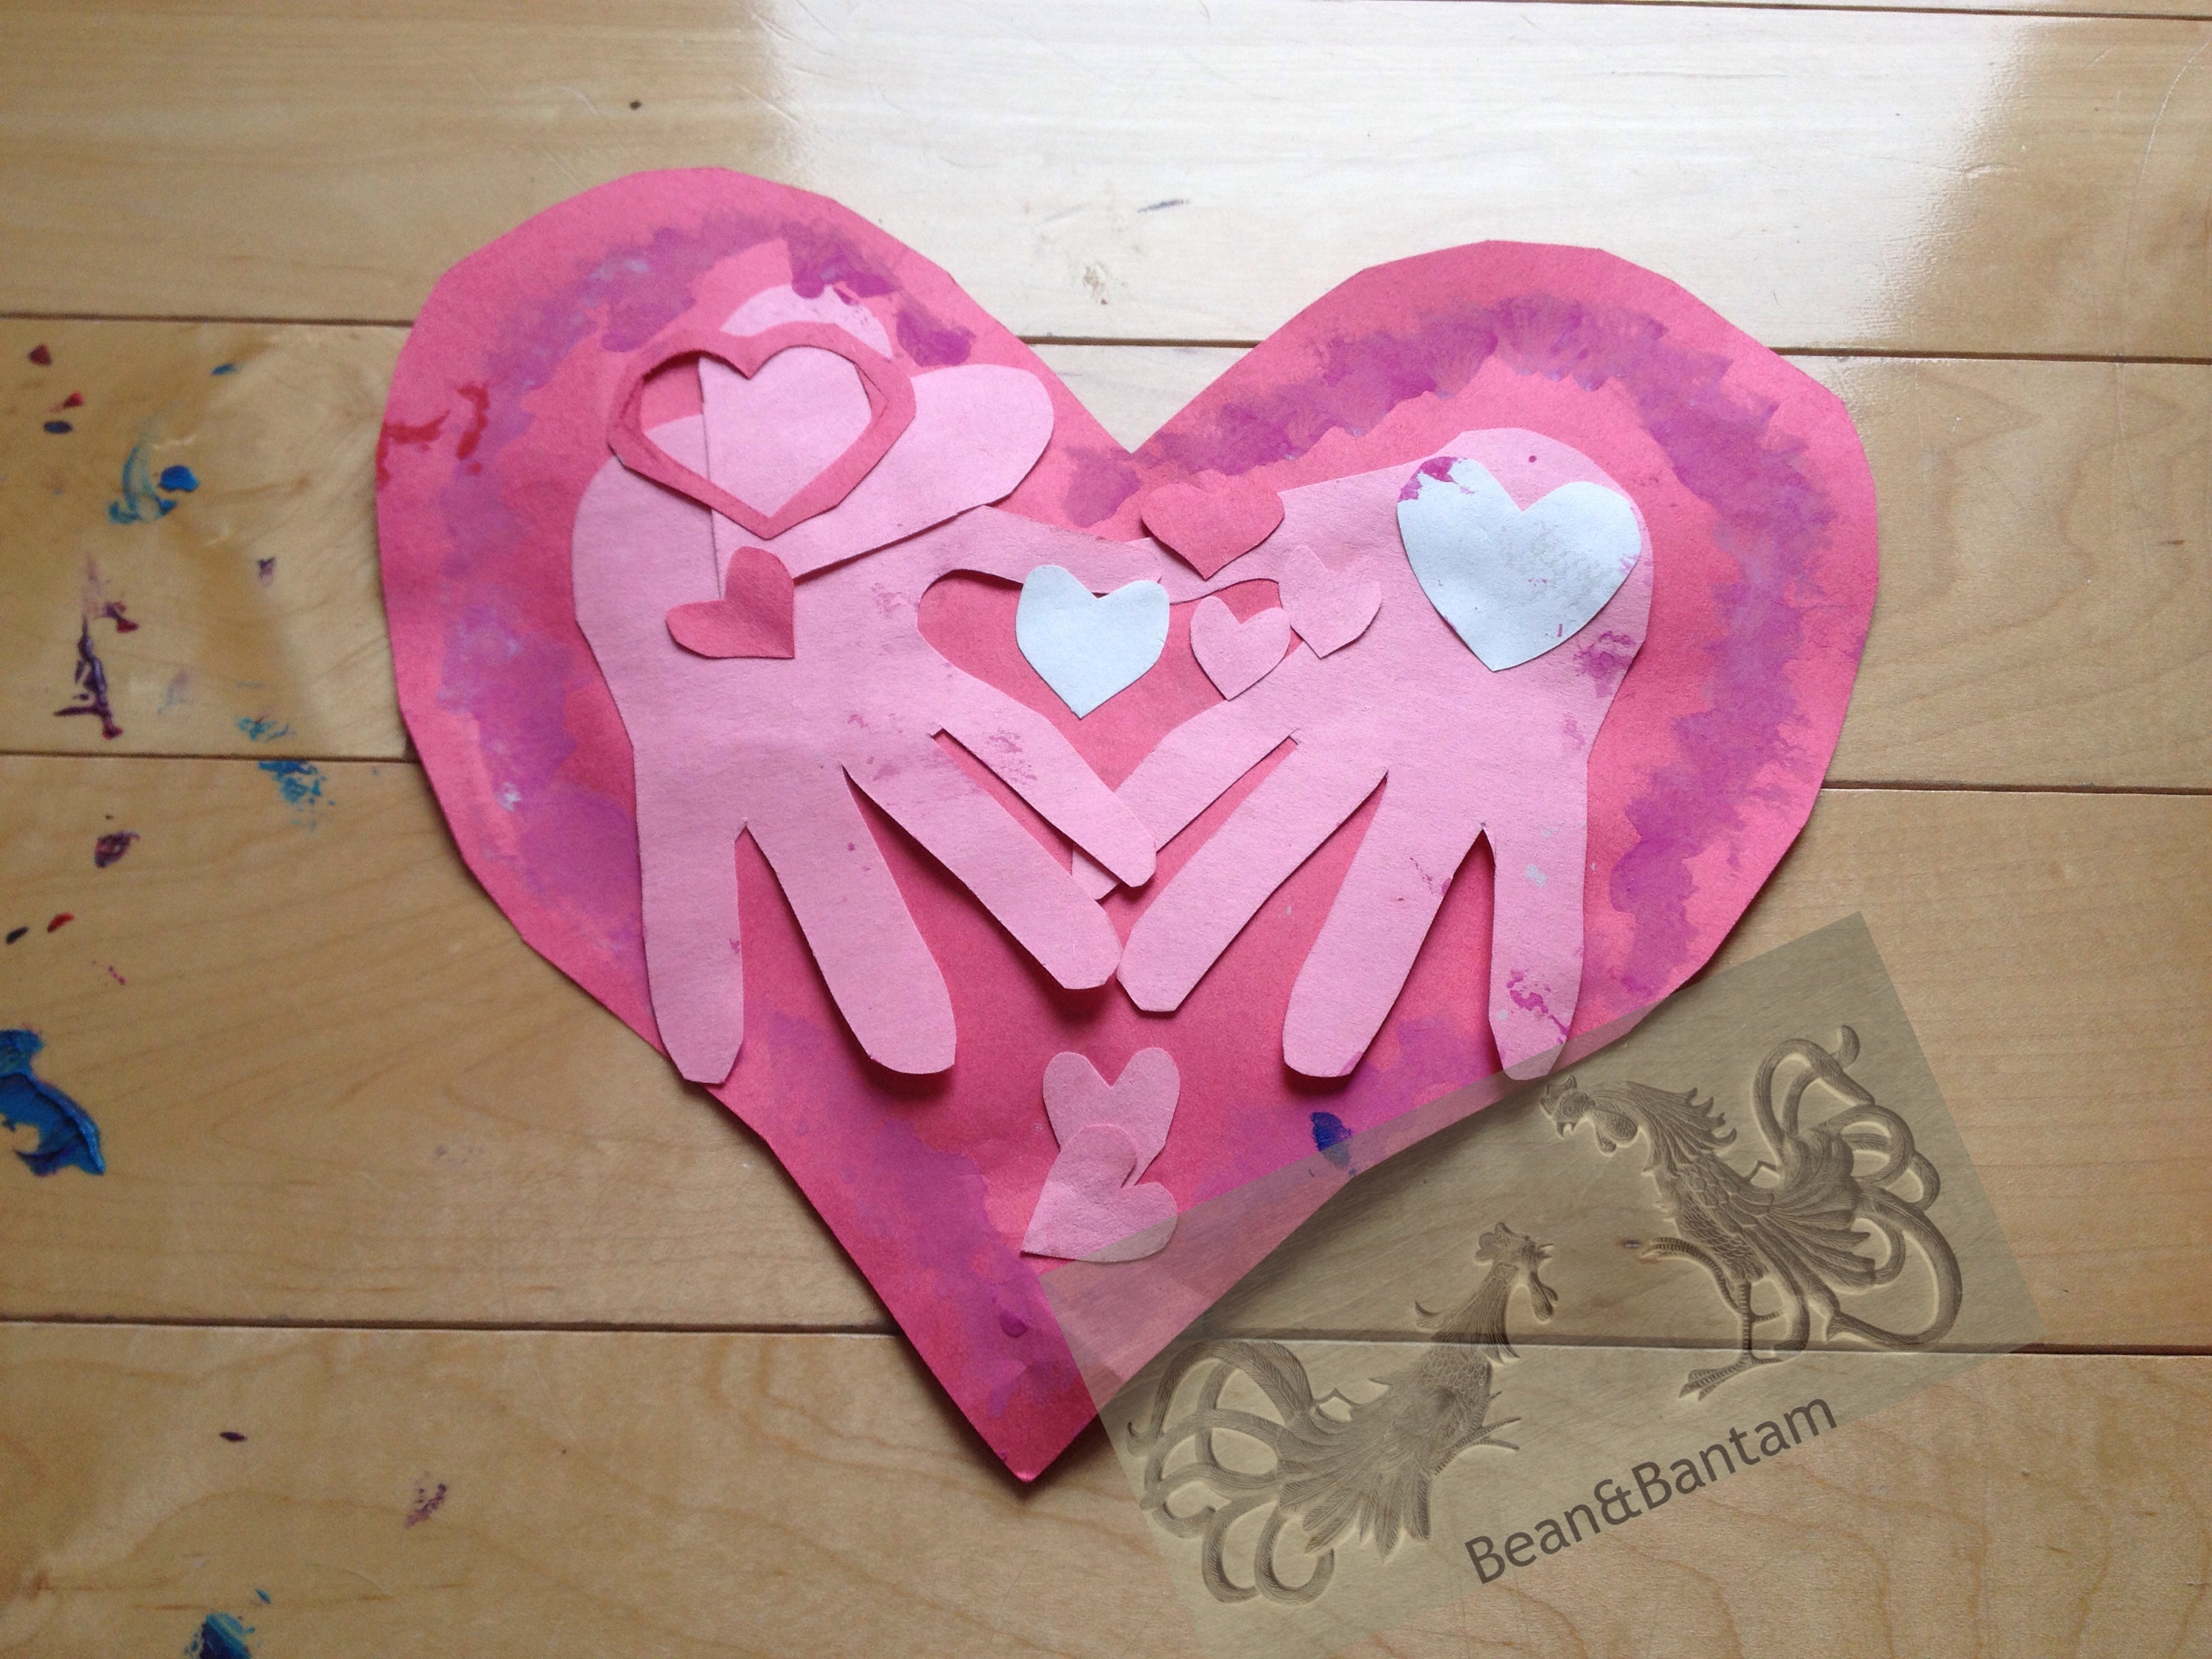 Messy Kid Fun: handmade valentines with a two and a half year old